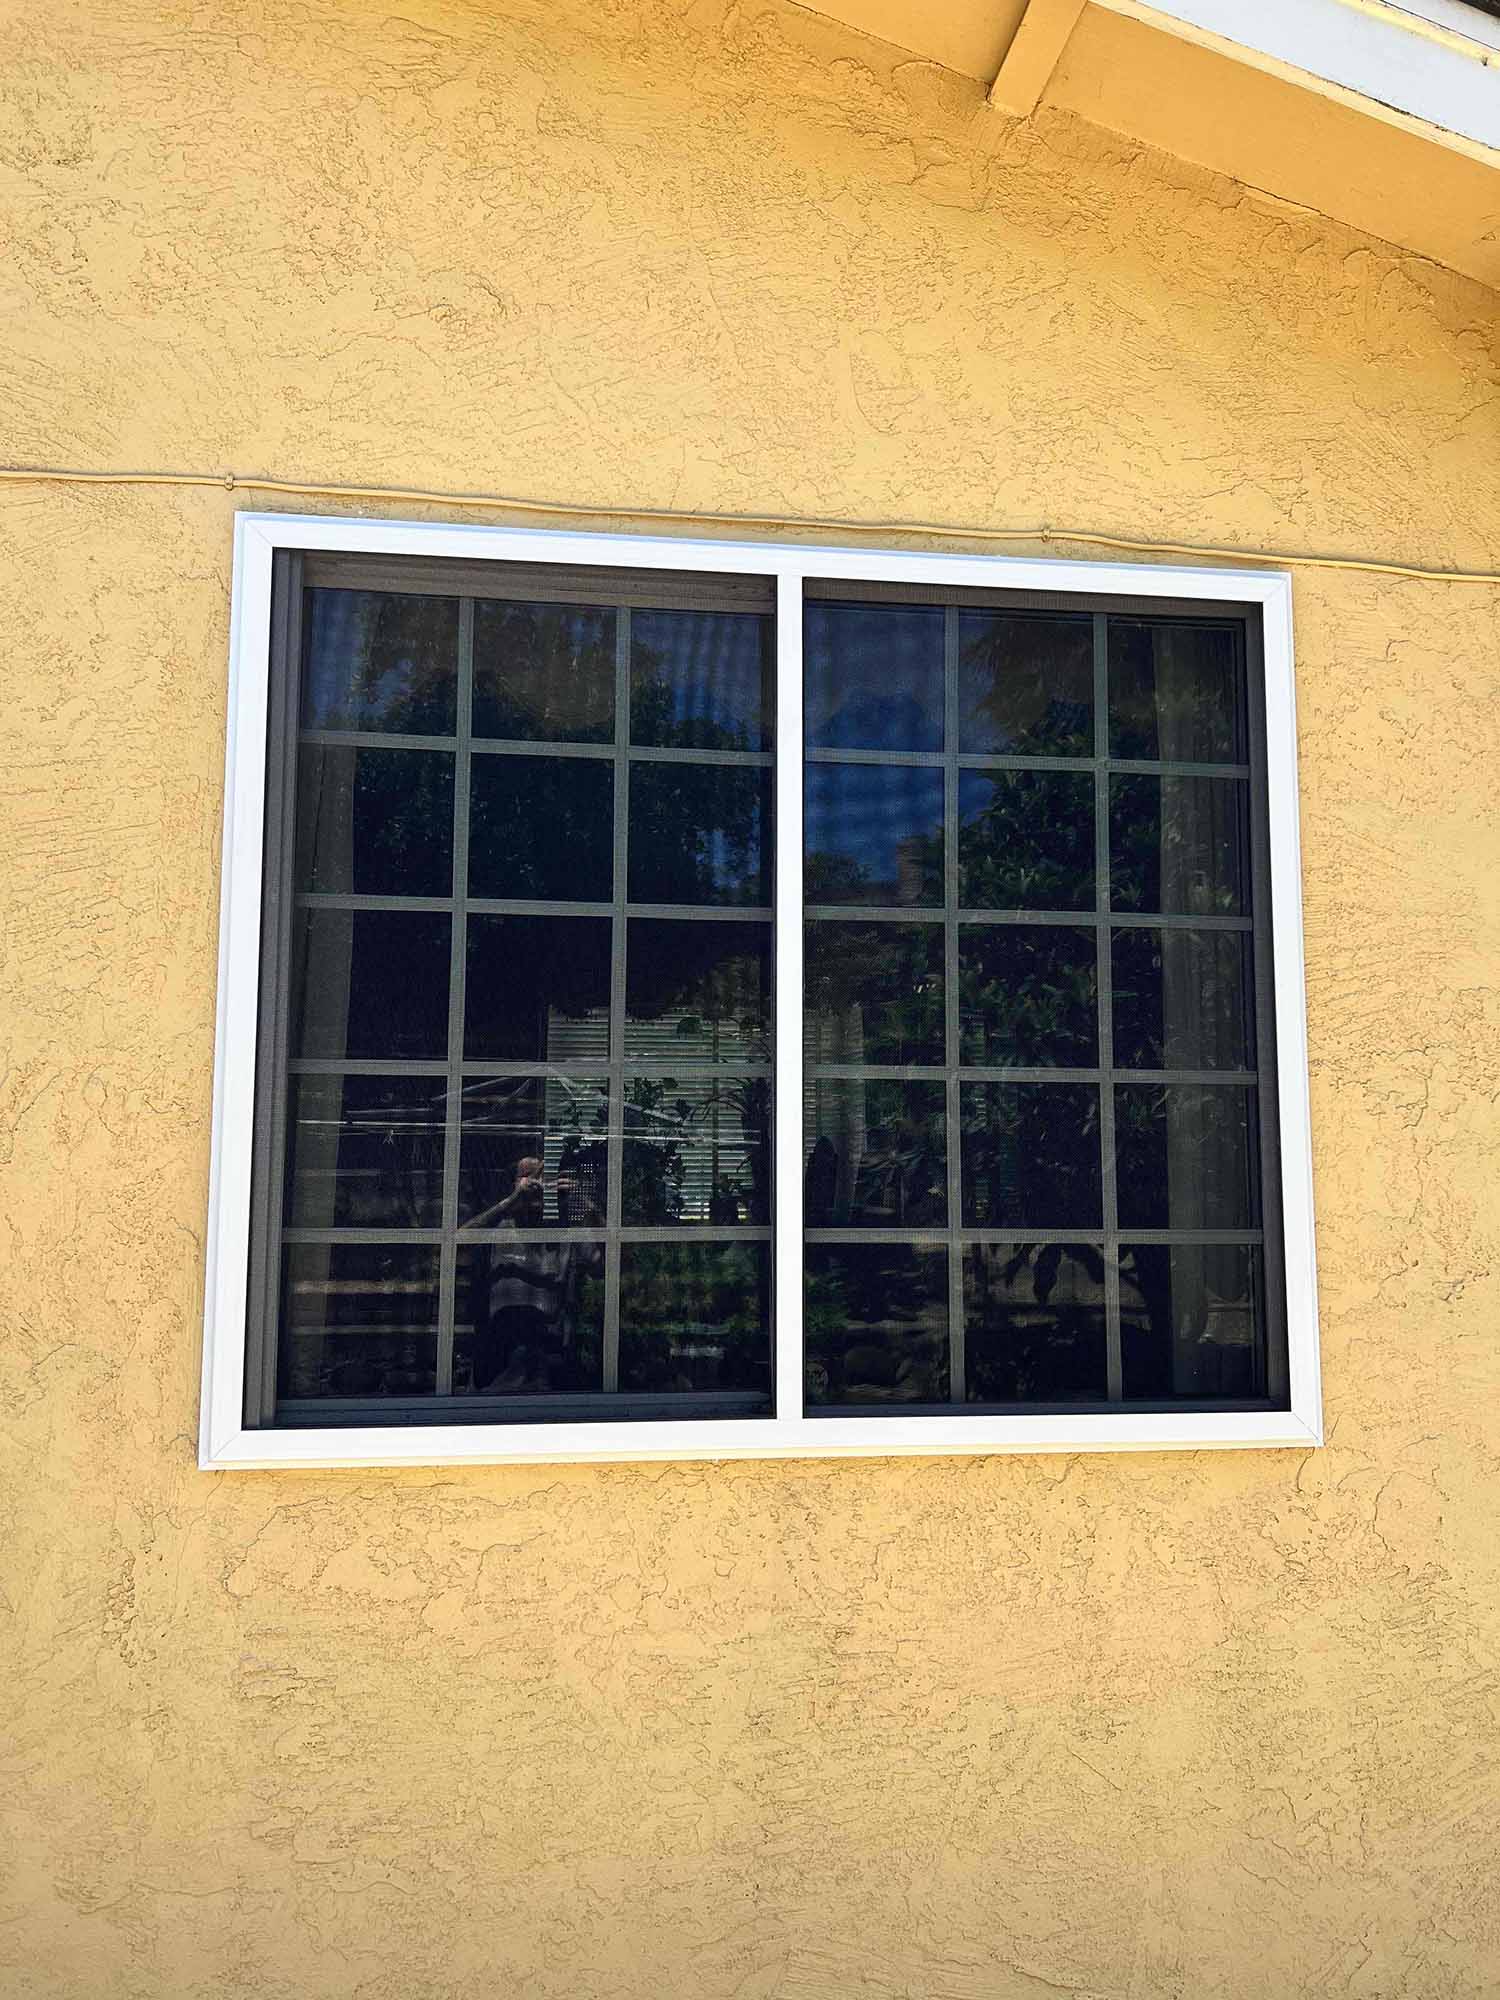 ClimatePro Installs Security Screens and Safety Film for Vallejo, CA Homes